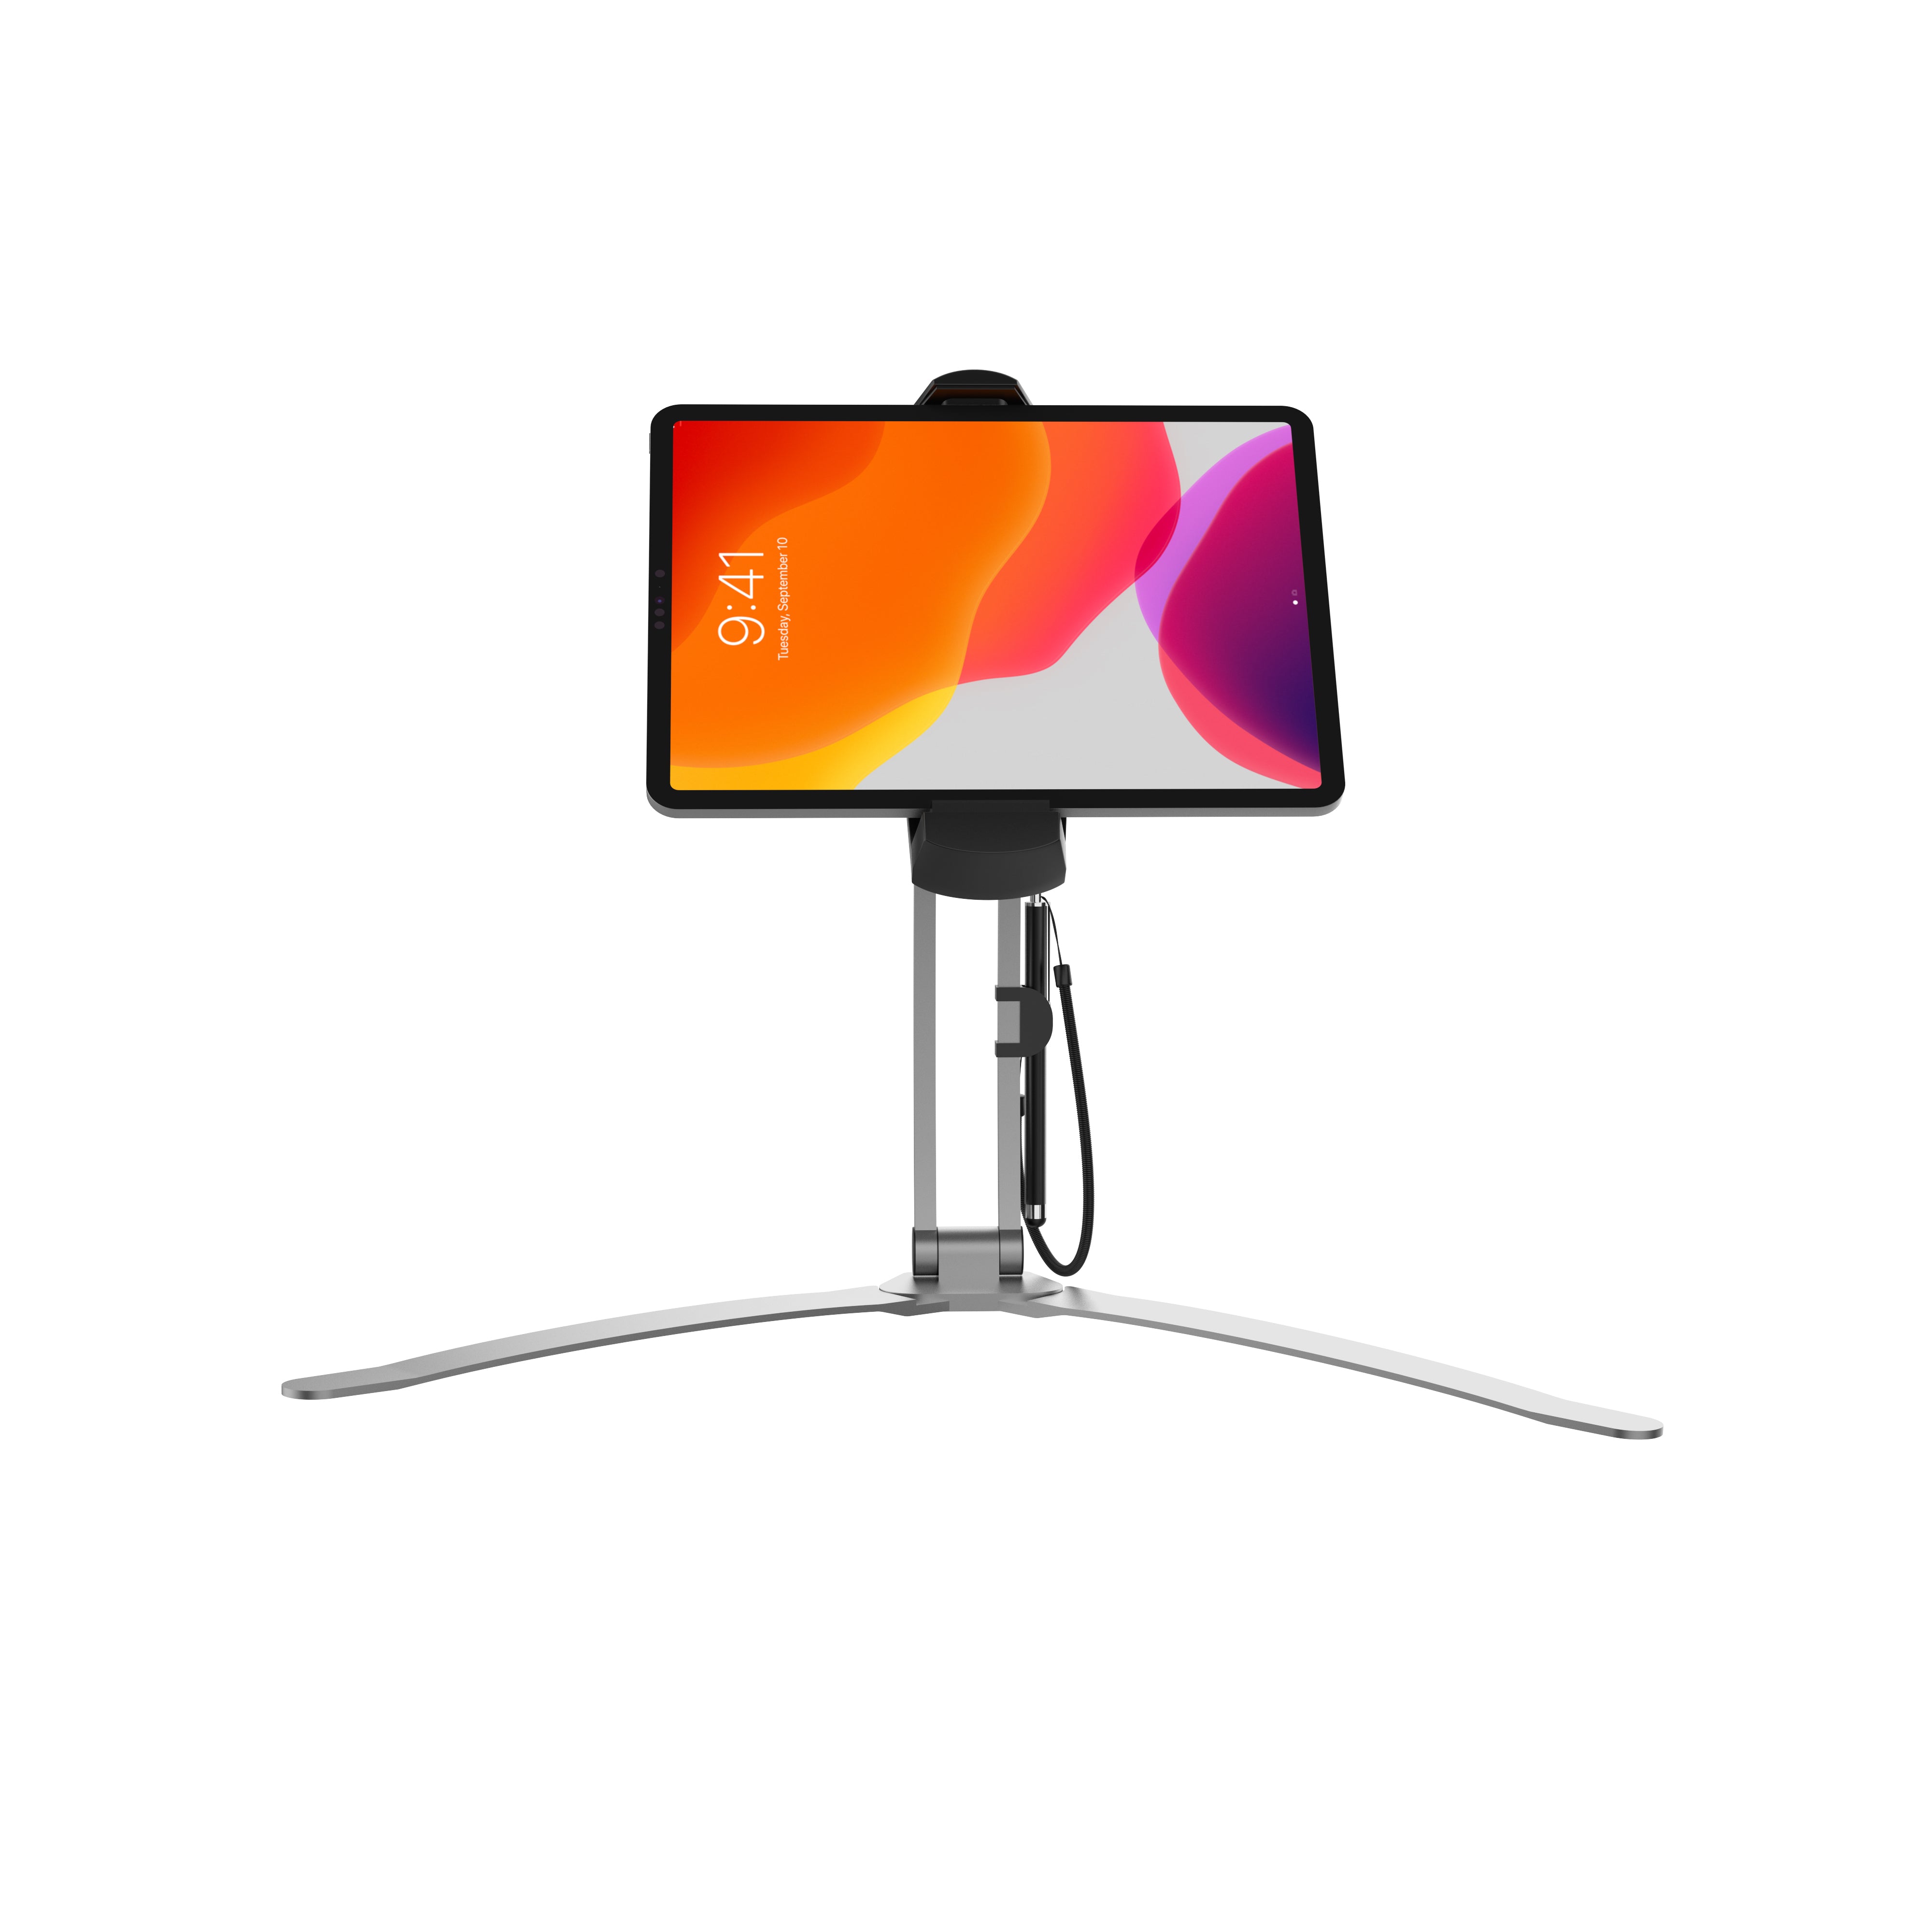 Multi-Flex Tablet Stand and Mount for 7-13 Inch Tablets, including iPad 10.2-inch (7th/ 8th/ 9th Generation)